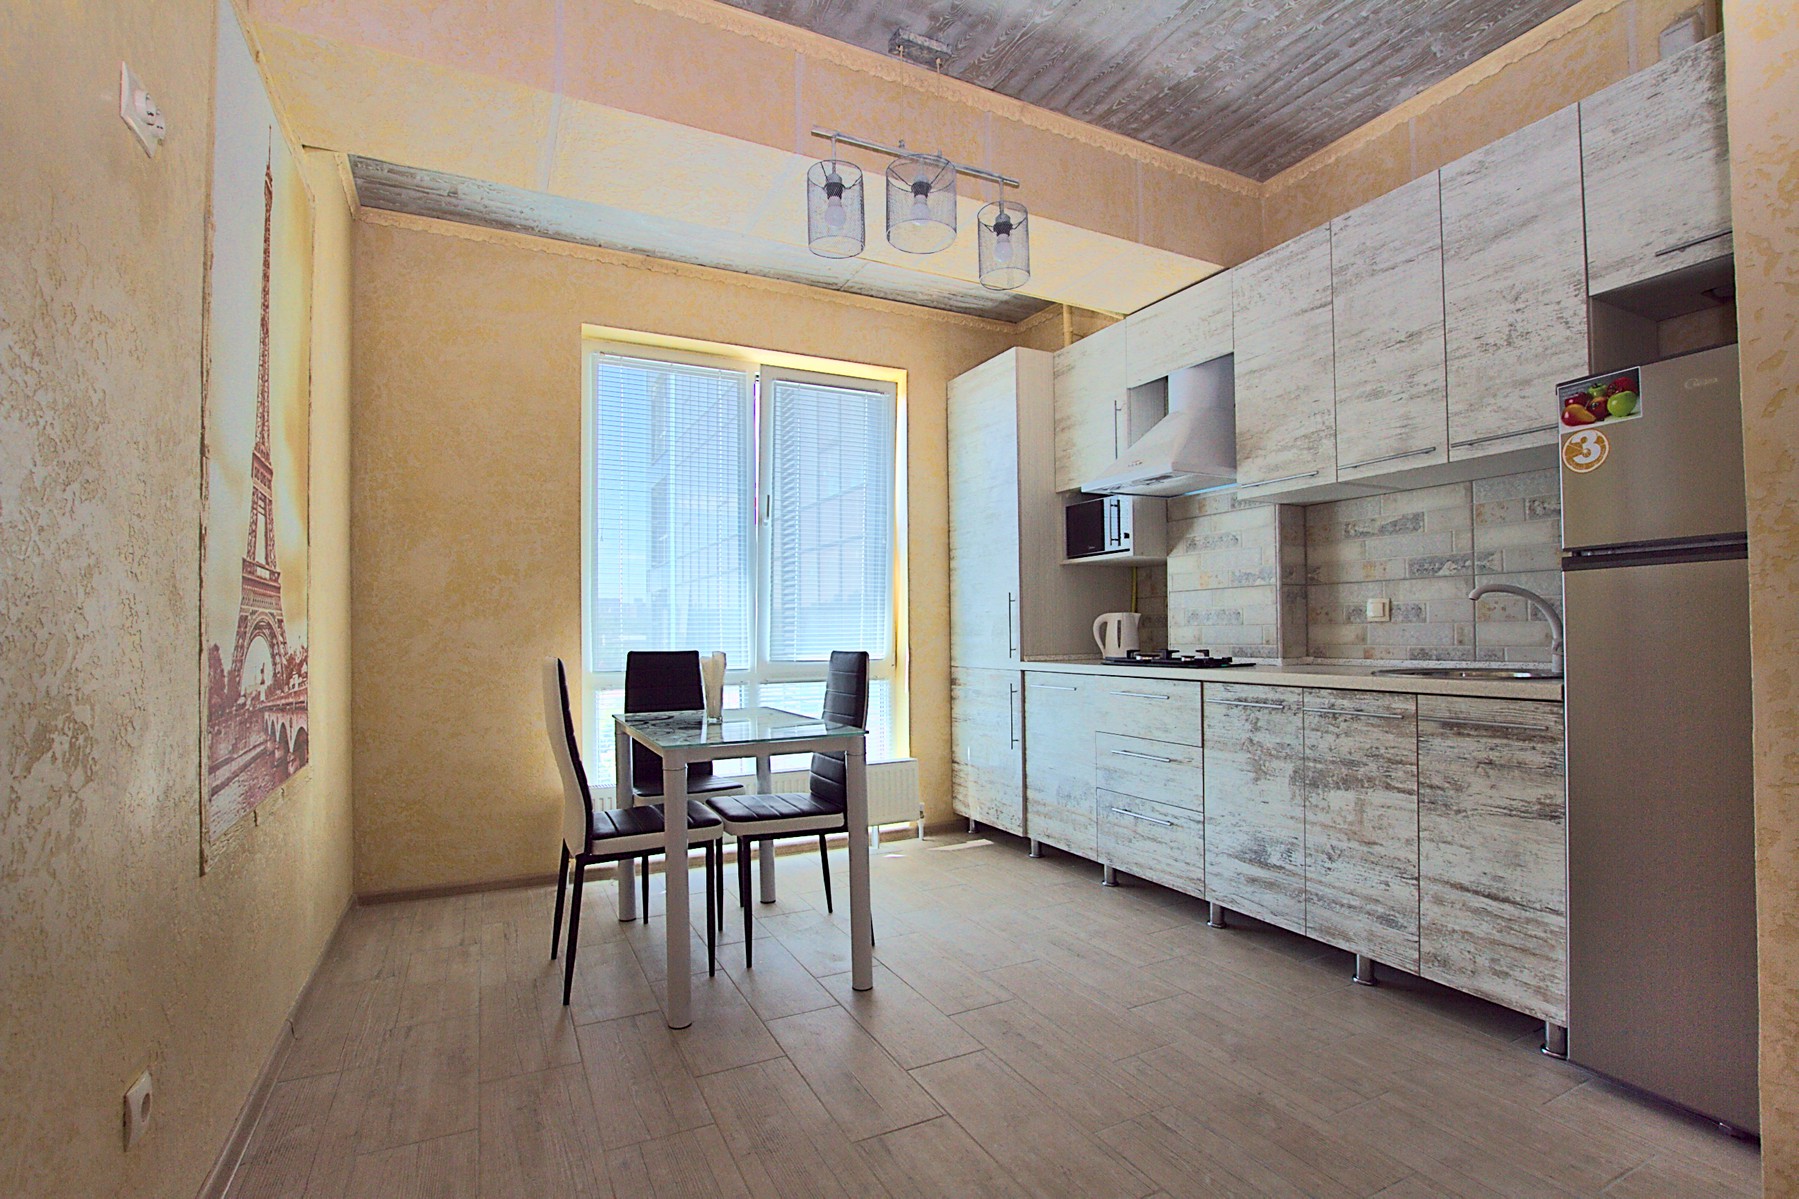 Uptown Studio Apartment is a 1 room apartment for rent in Chisinau, Moldova